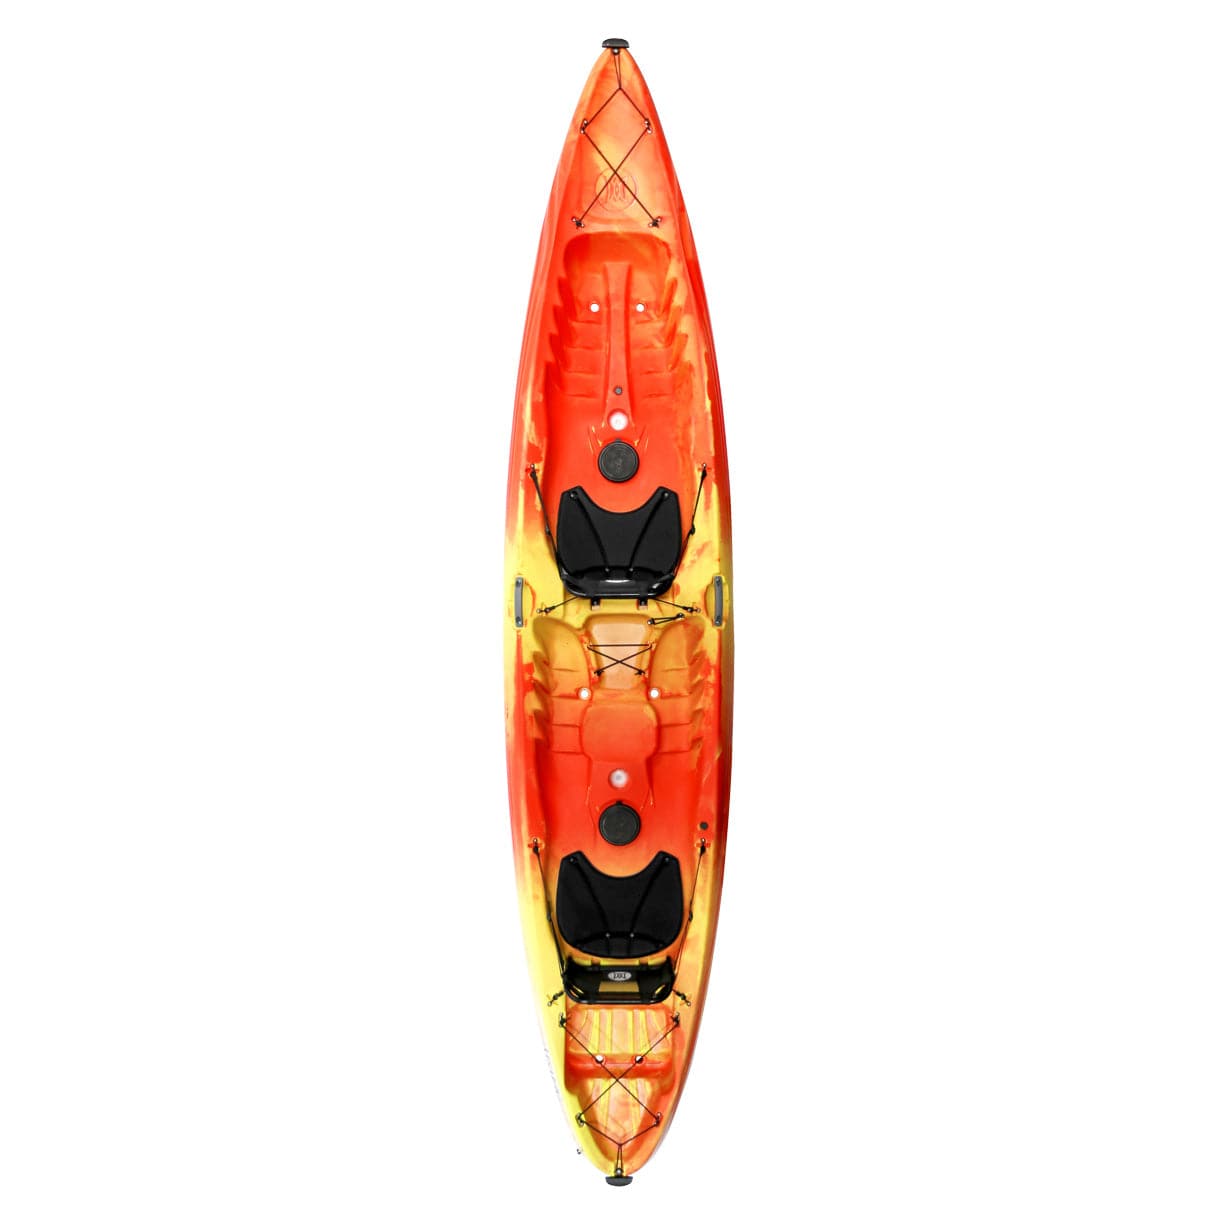 Featuring the Tribe 13.5 Tandem tandem / 2 person rec kayak manufactured by Perception shown here from a fourth angle.